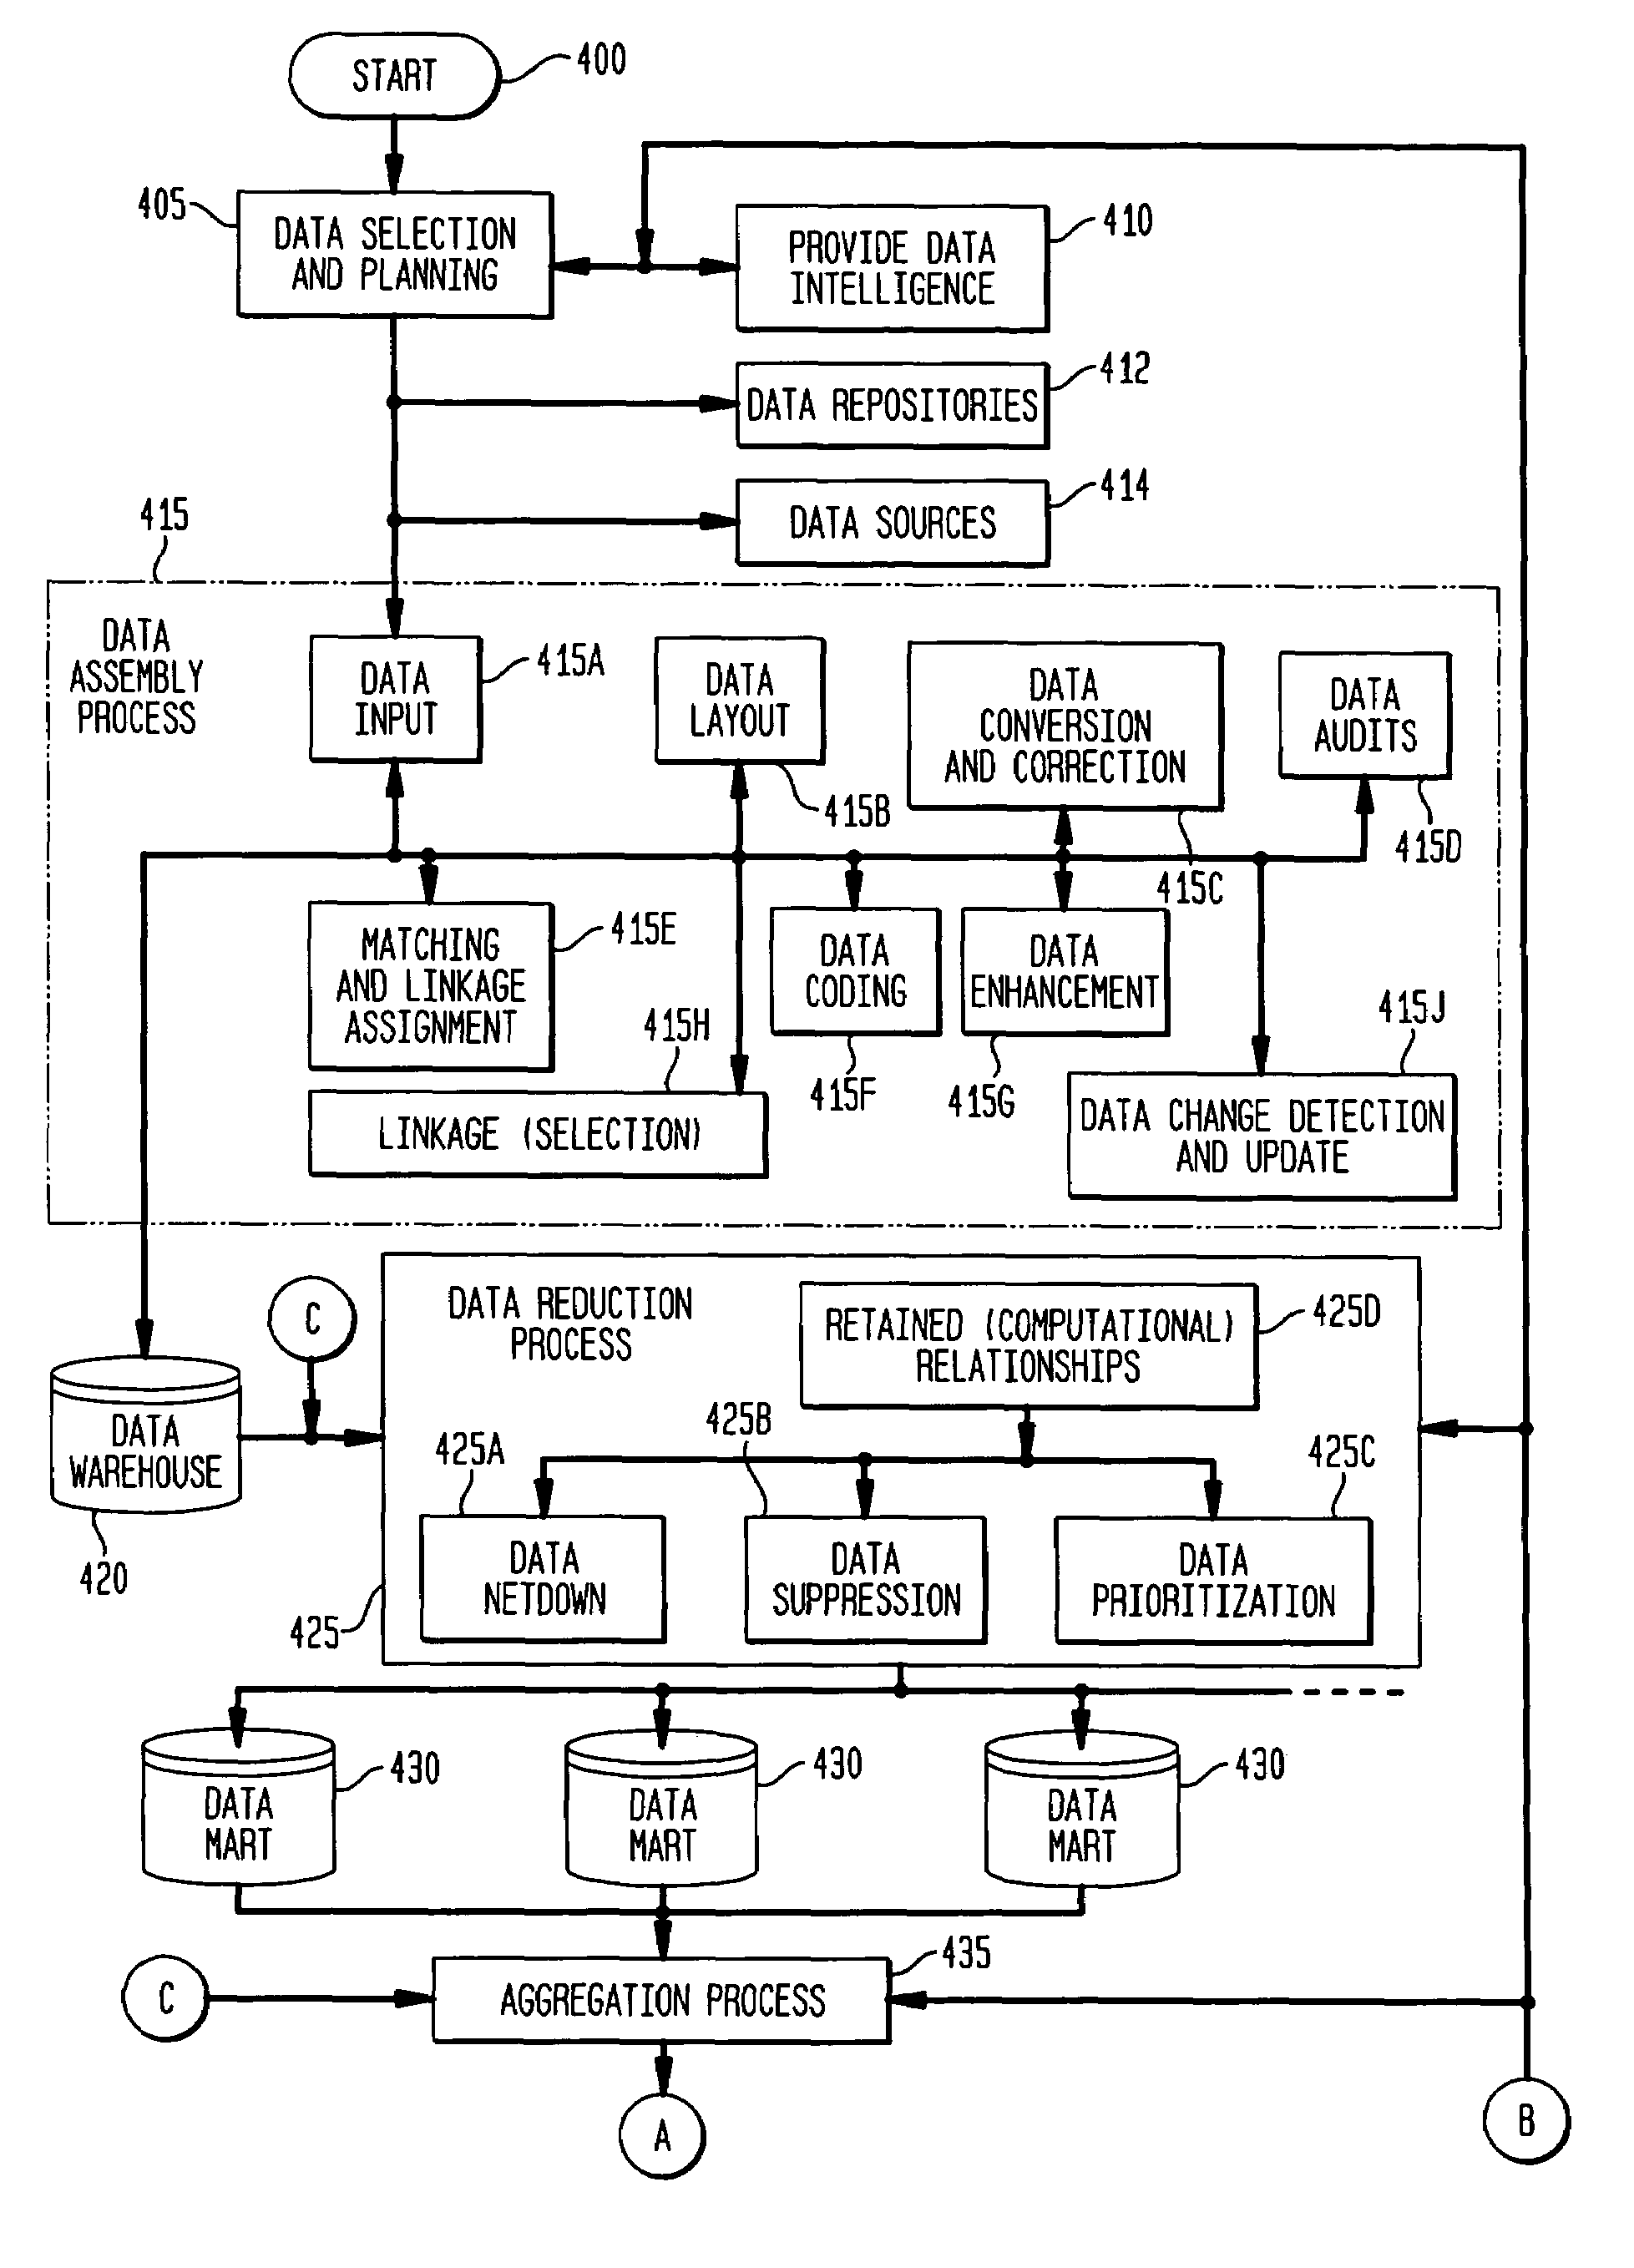 Software and metadata structures for distributed and interactive database architecture for parallel and asynchronous data processing of complex data and for real-time query processing